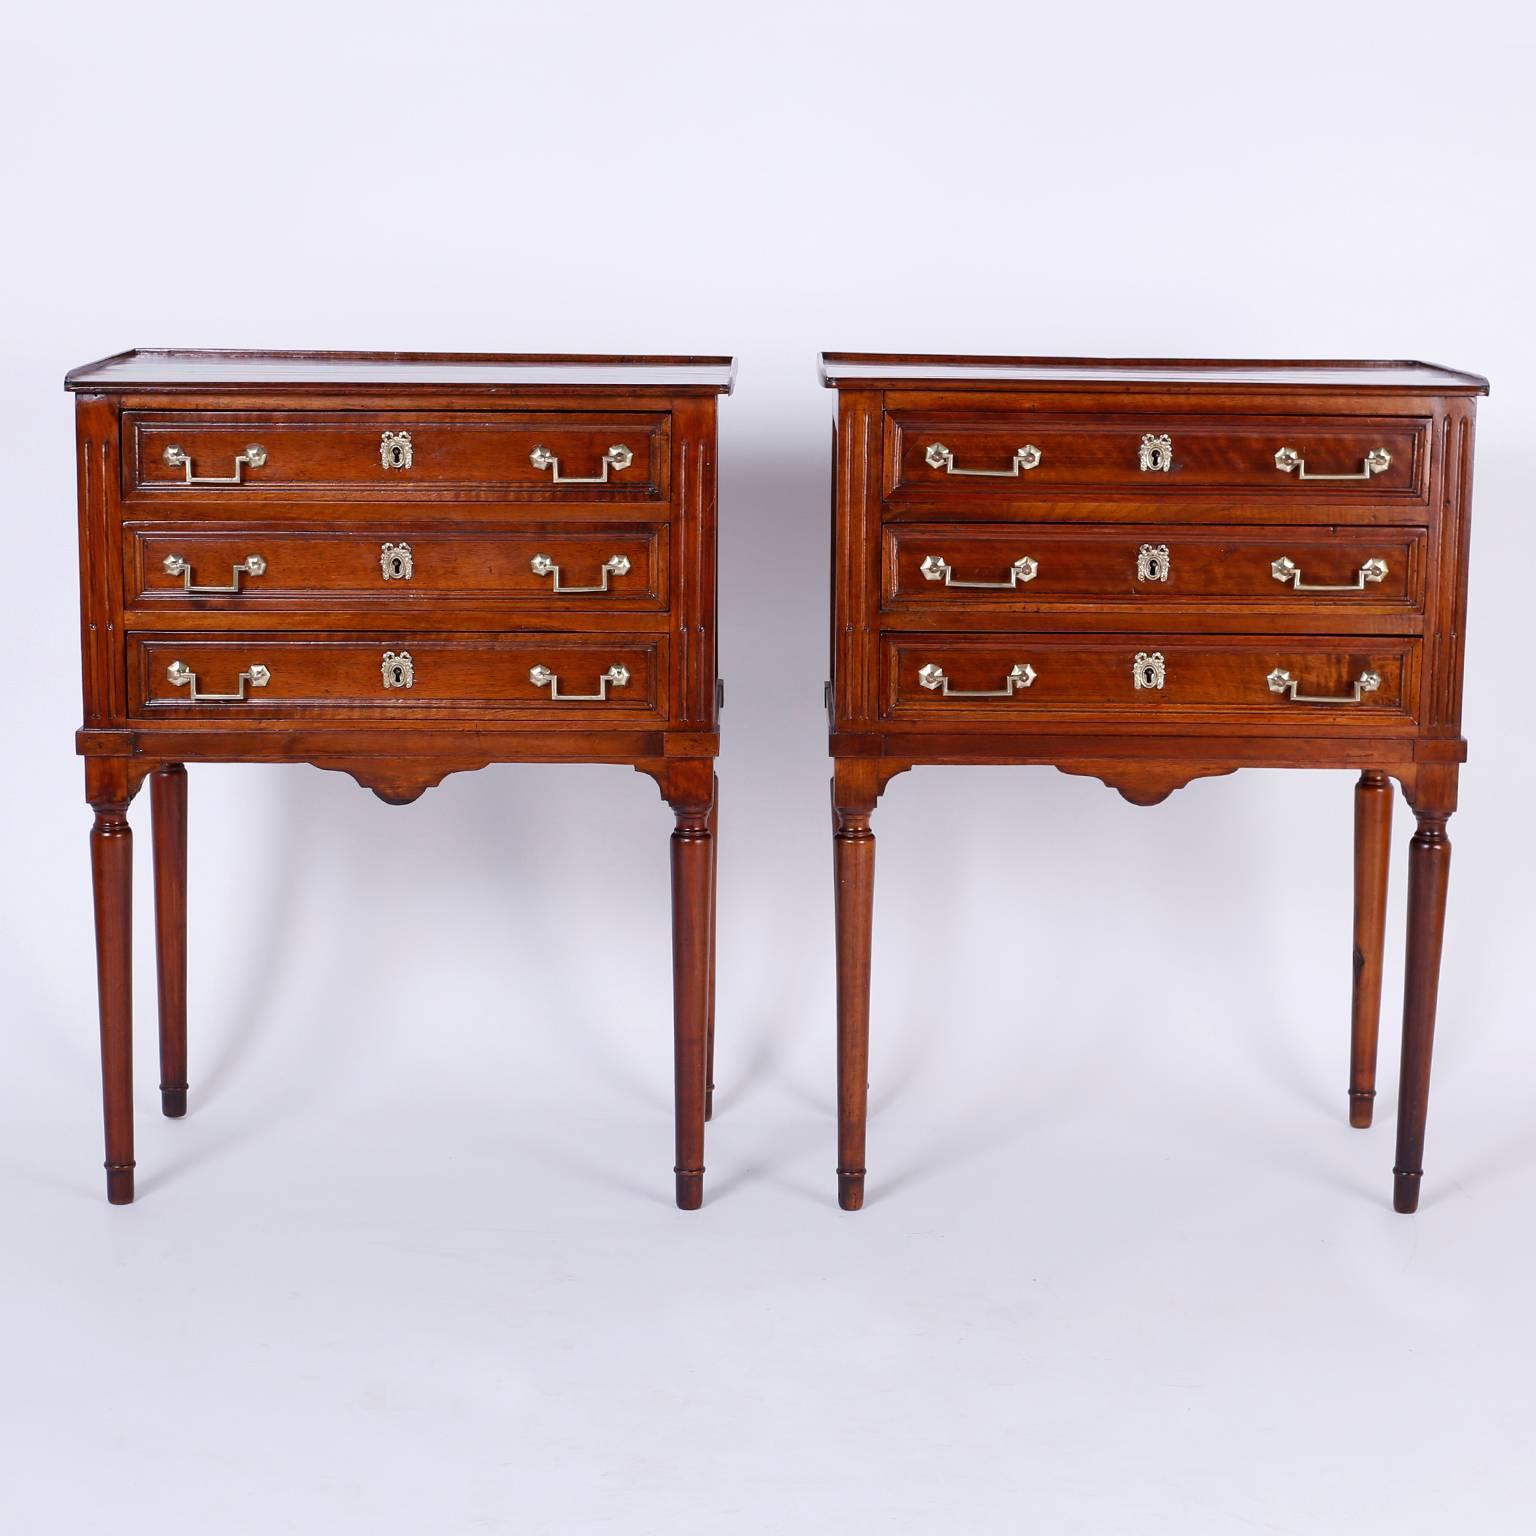 Pair of refined French three-drawer stands expertly crafted by hand with richly grained mahogany in the style of Louis XVI. The tops are single plank with a slight gallery. The sides and drawer faces are paneled. The case sits on elegant turned legs